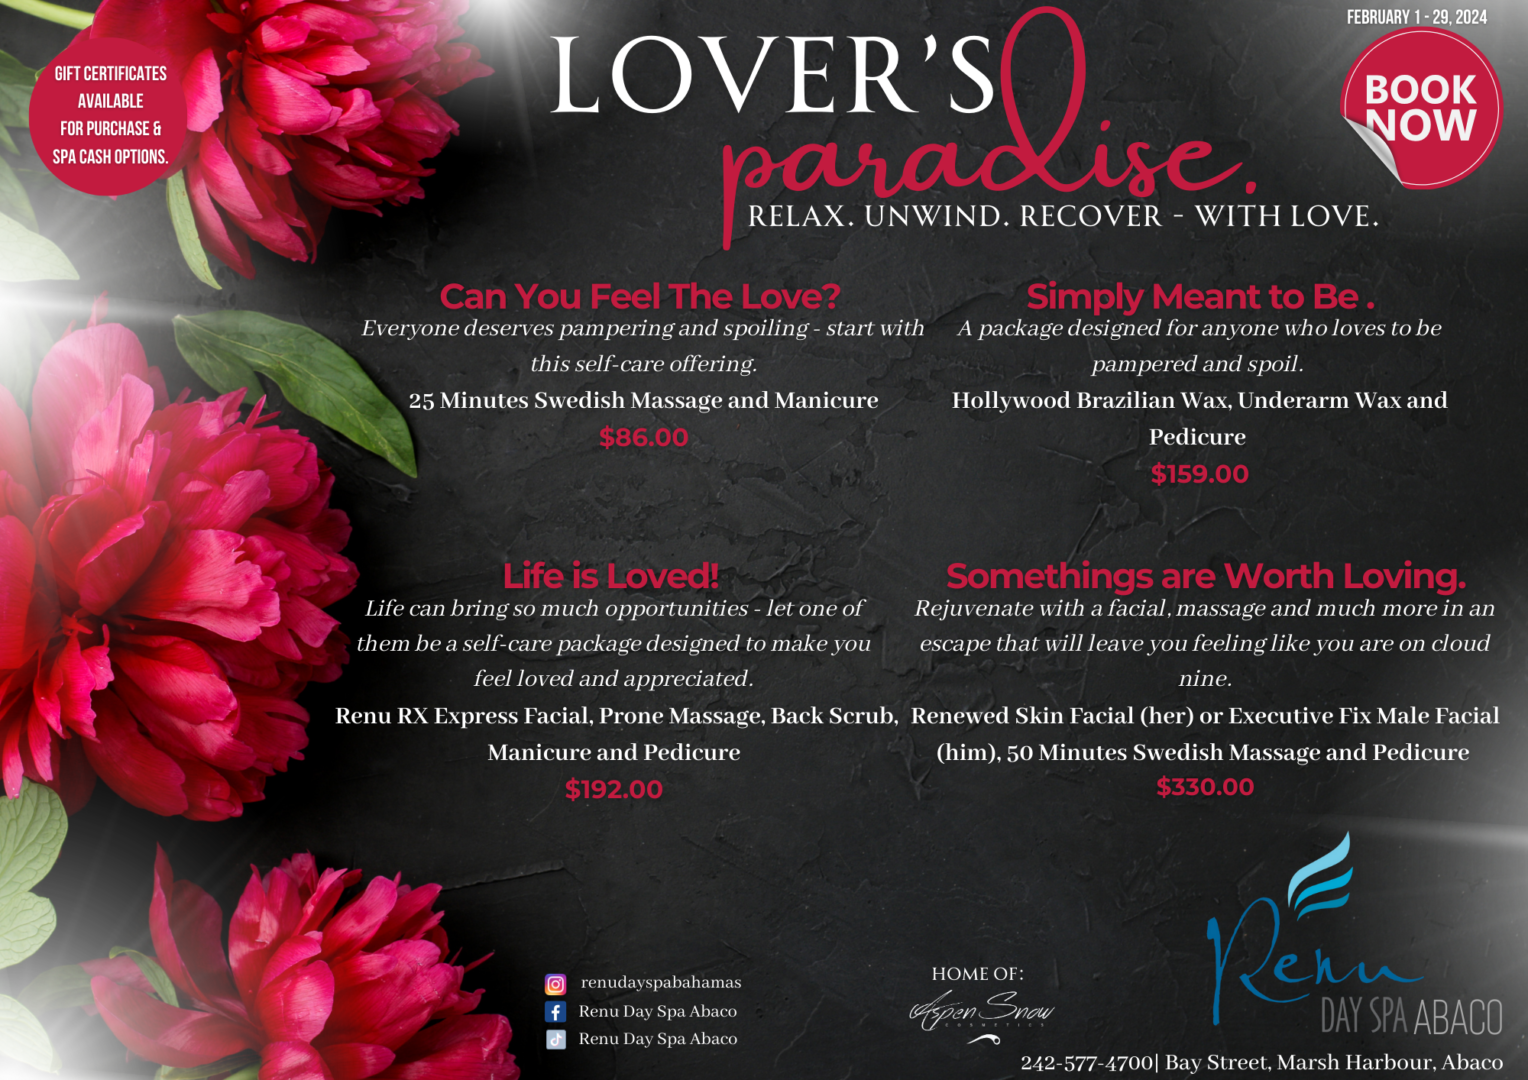 Embrace a, "Lover's Paradise" with us! Make reservations as we would love to have an opportunity to serve you, or purchase a gift card for a loved one. 